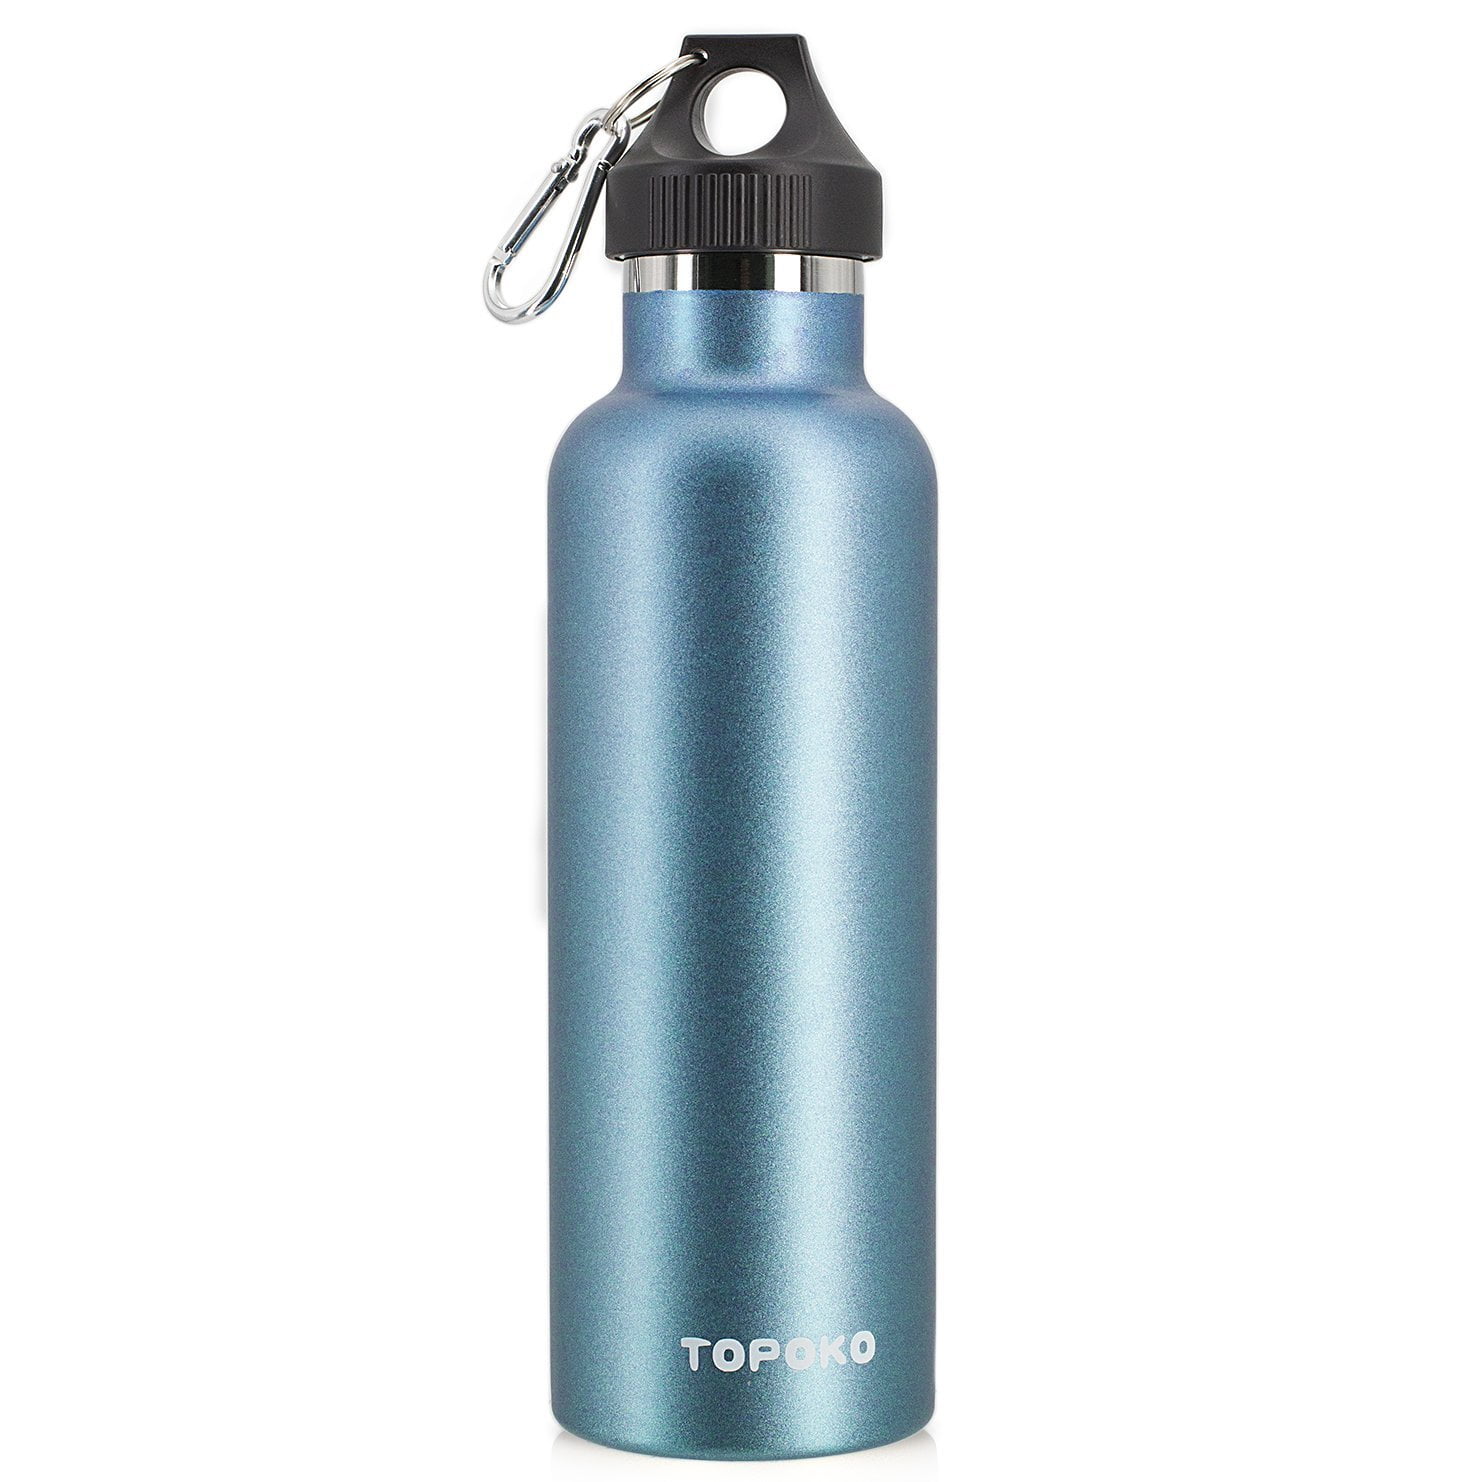 TOPOKO 25 Ounce Double Wall Stainless Steel Water Bottle Vacuum Insulation Bottle Leak Proof Bottle,BPA Free with Straw with Handle Flip Top Spout Lid-Sky Blue 